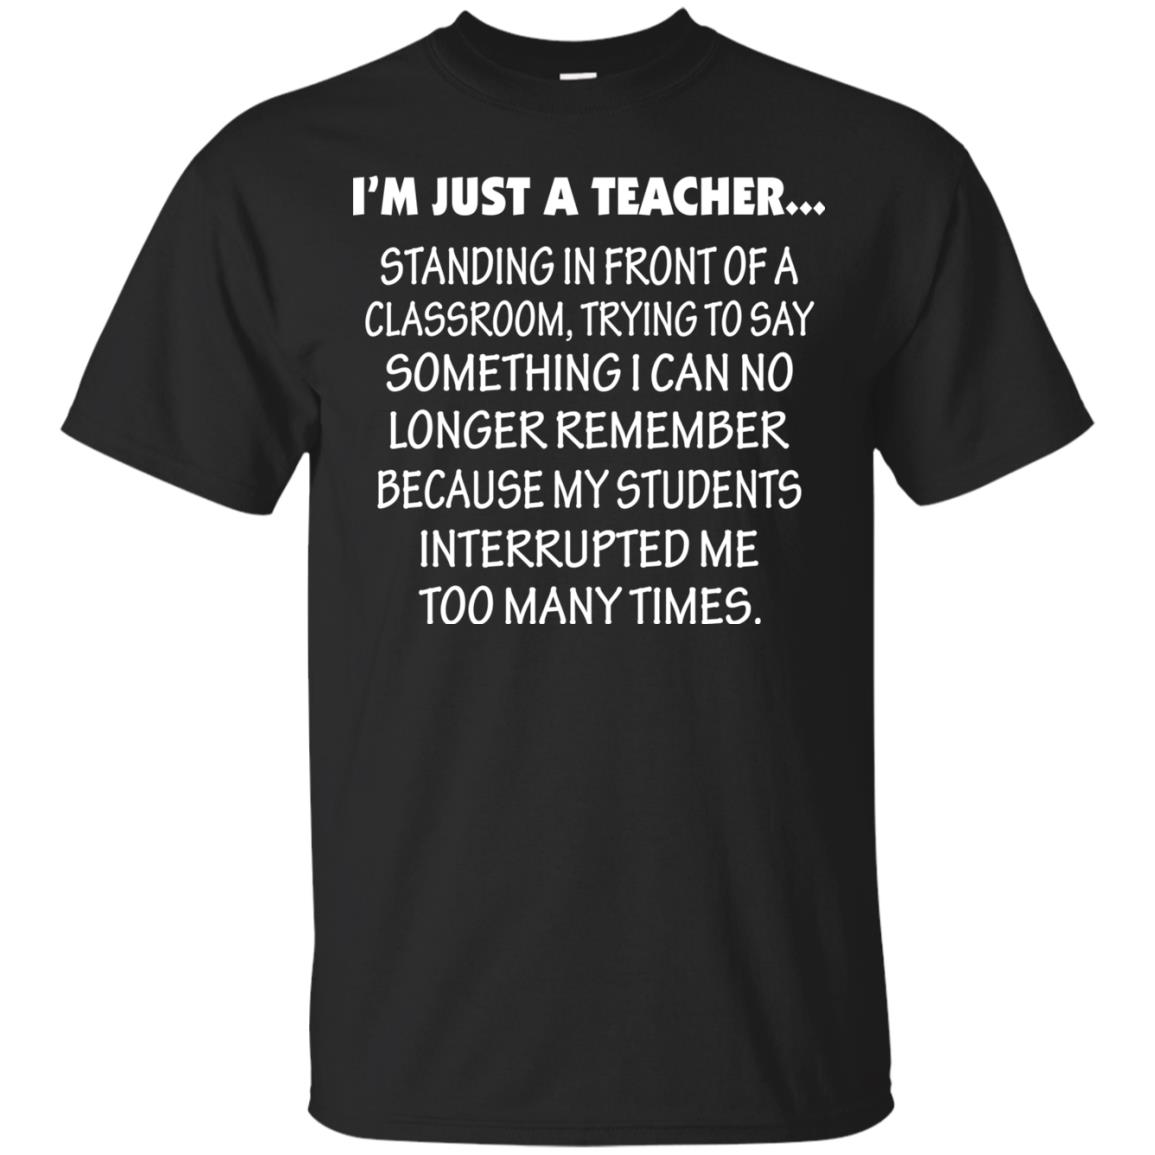 I'm Just A Teacher - Standing In Front Of A Classroom T-Shirts, Hoodies, Tank Top